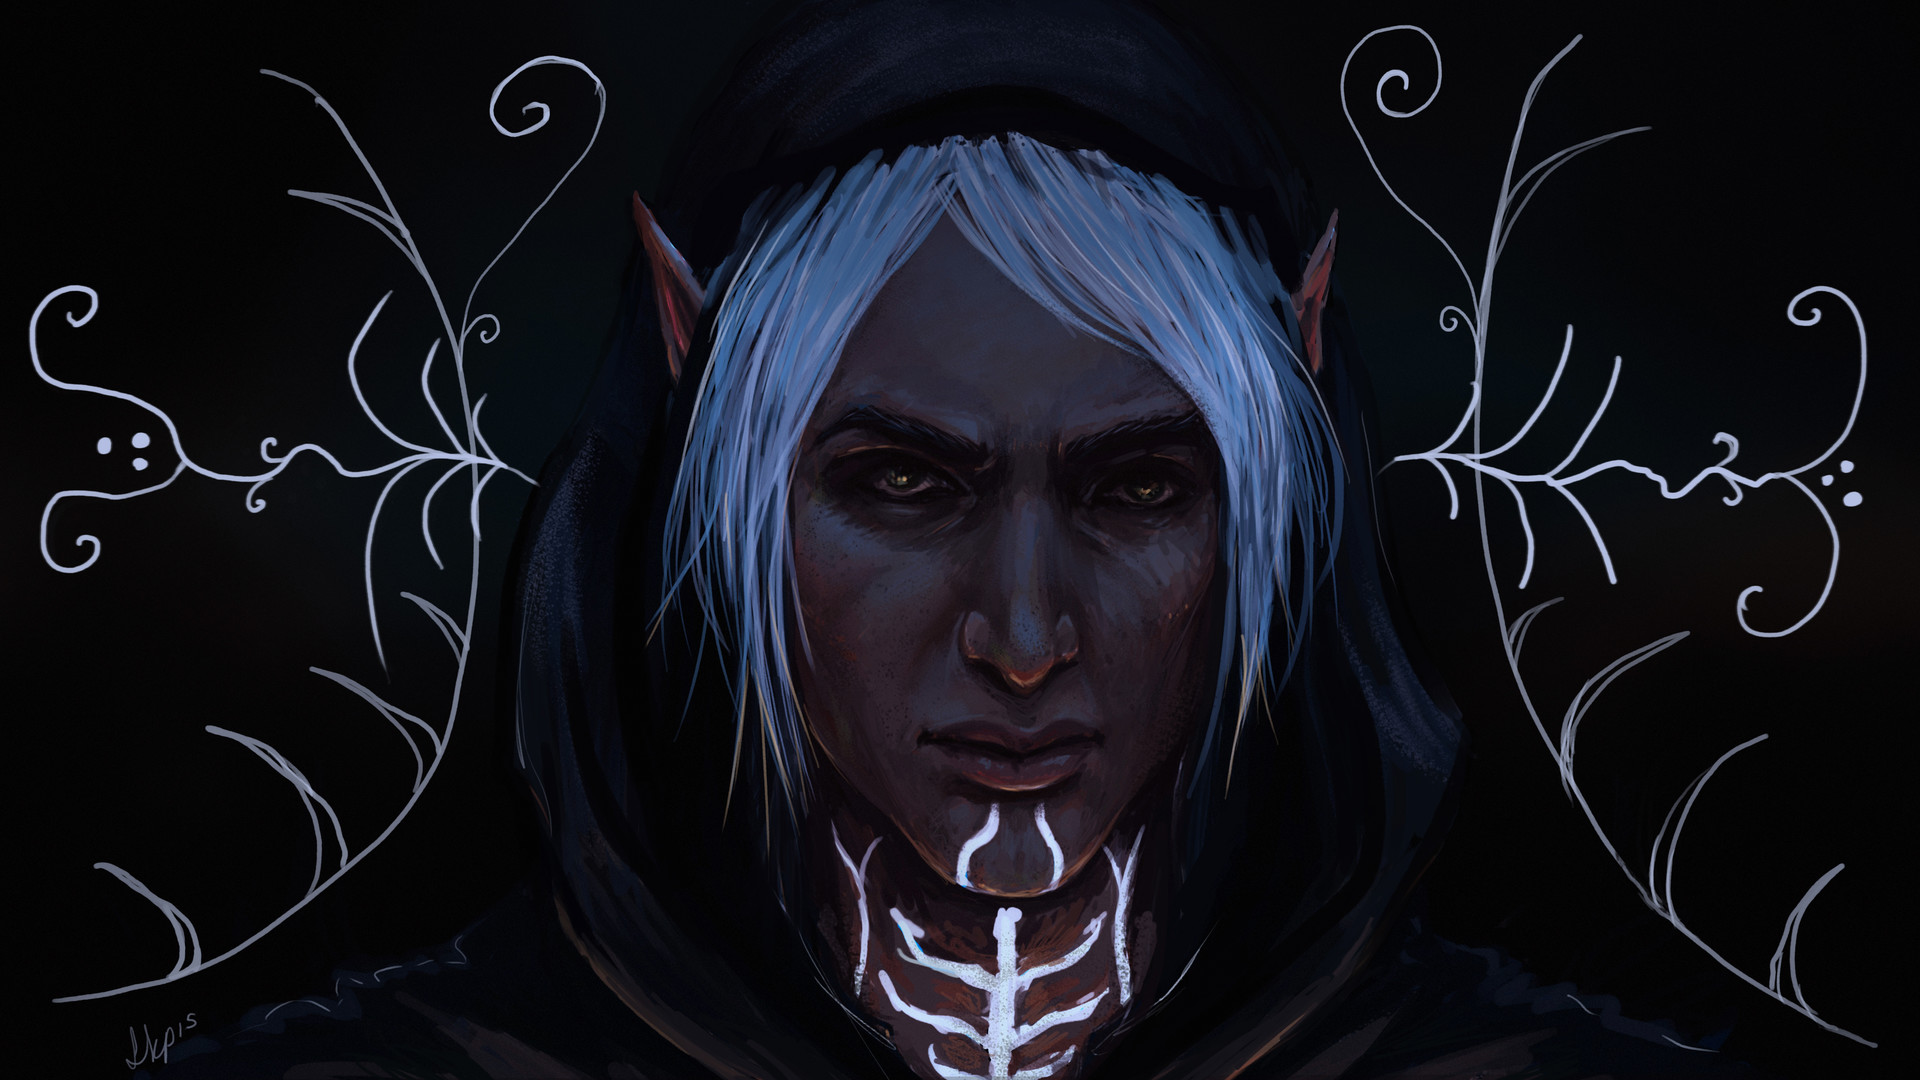 Another fan art from Dragon age. 